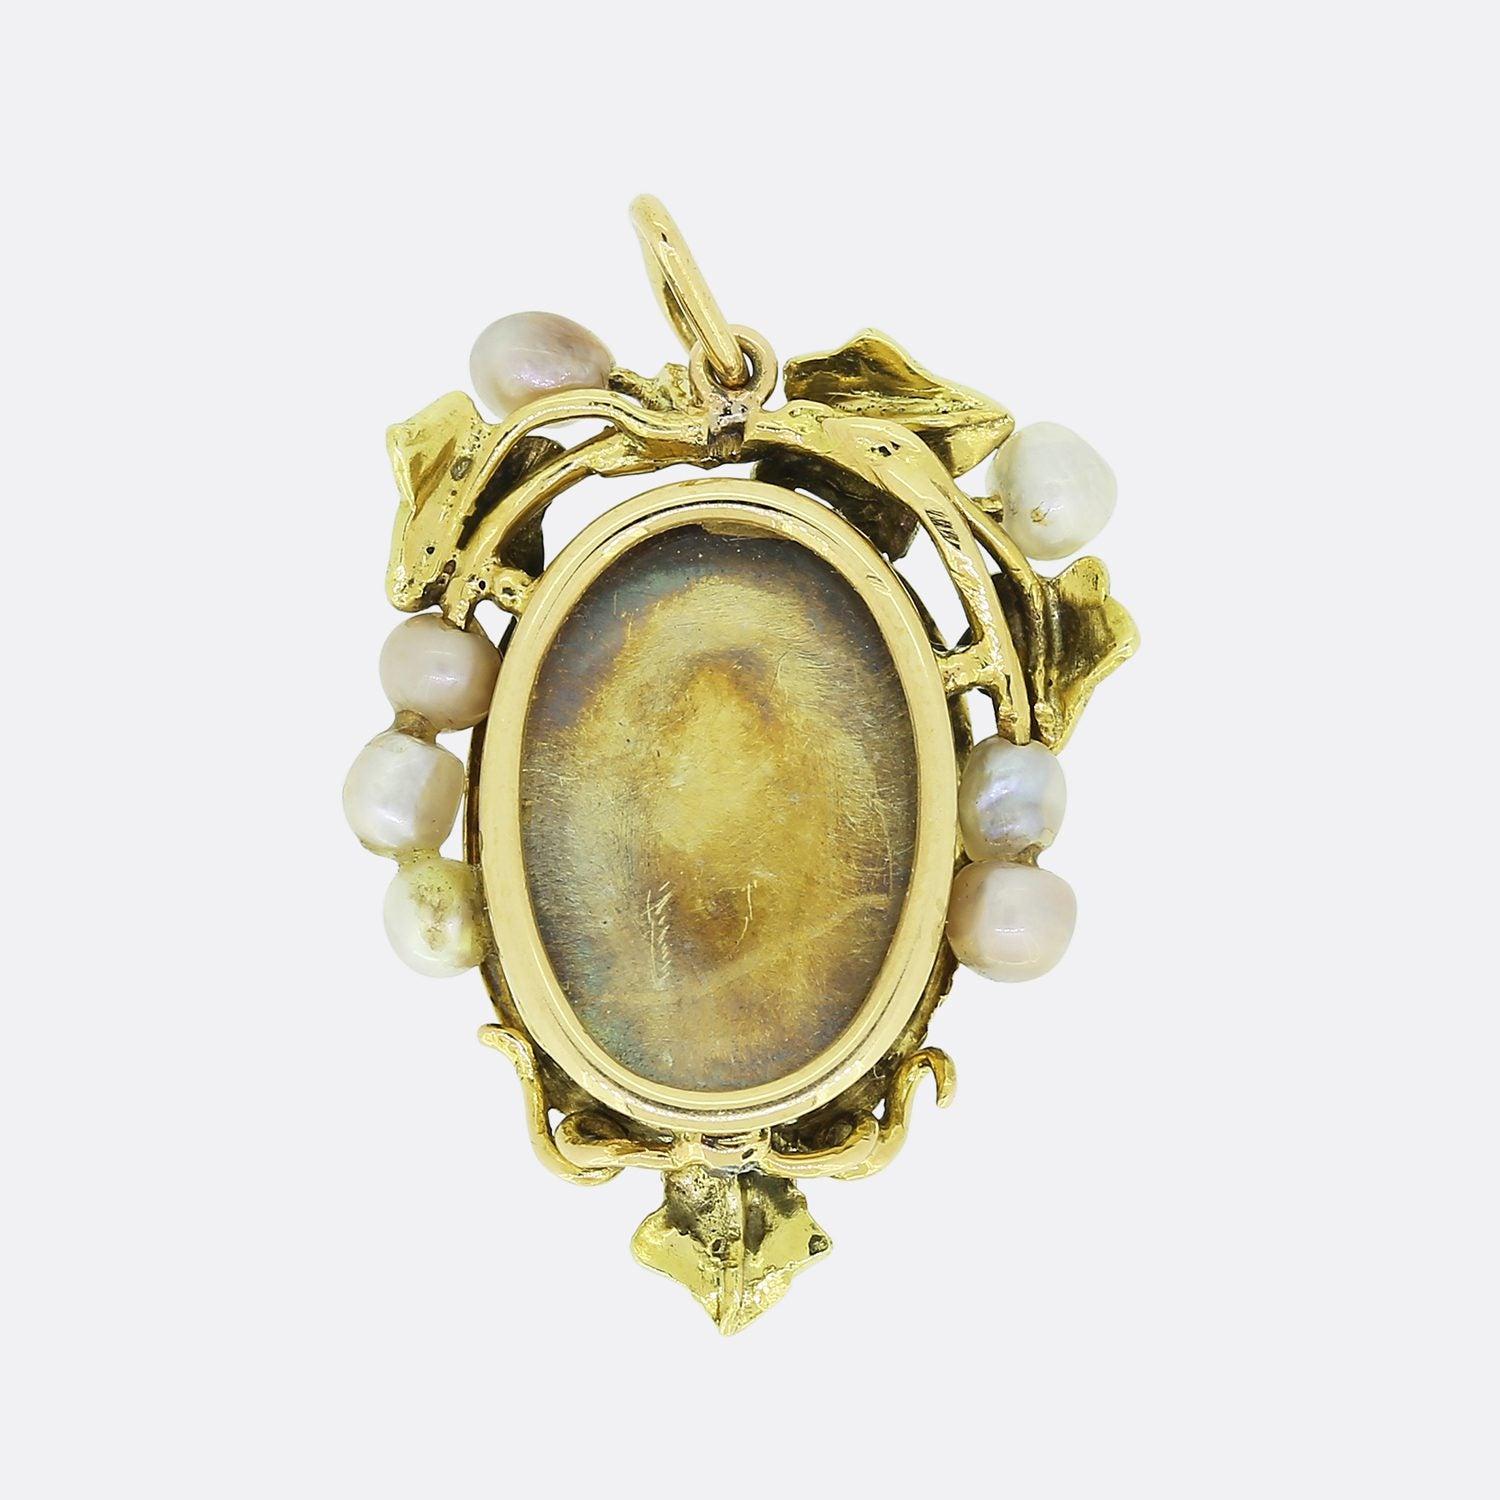 This is a lovely 18ct yellow gold Victorian pendant.  The pendant is in a foliate style and features green enamelled leaves and natural pearls which play the role of the fruit. The pendant is also set with five rose-cut diamonds in the centre. The